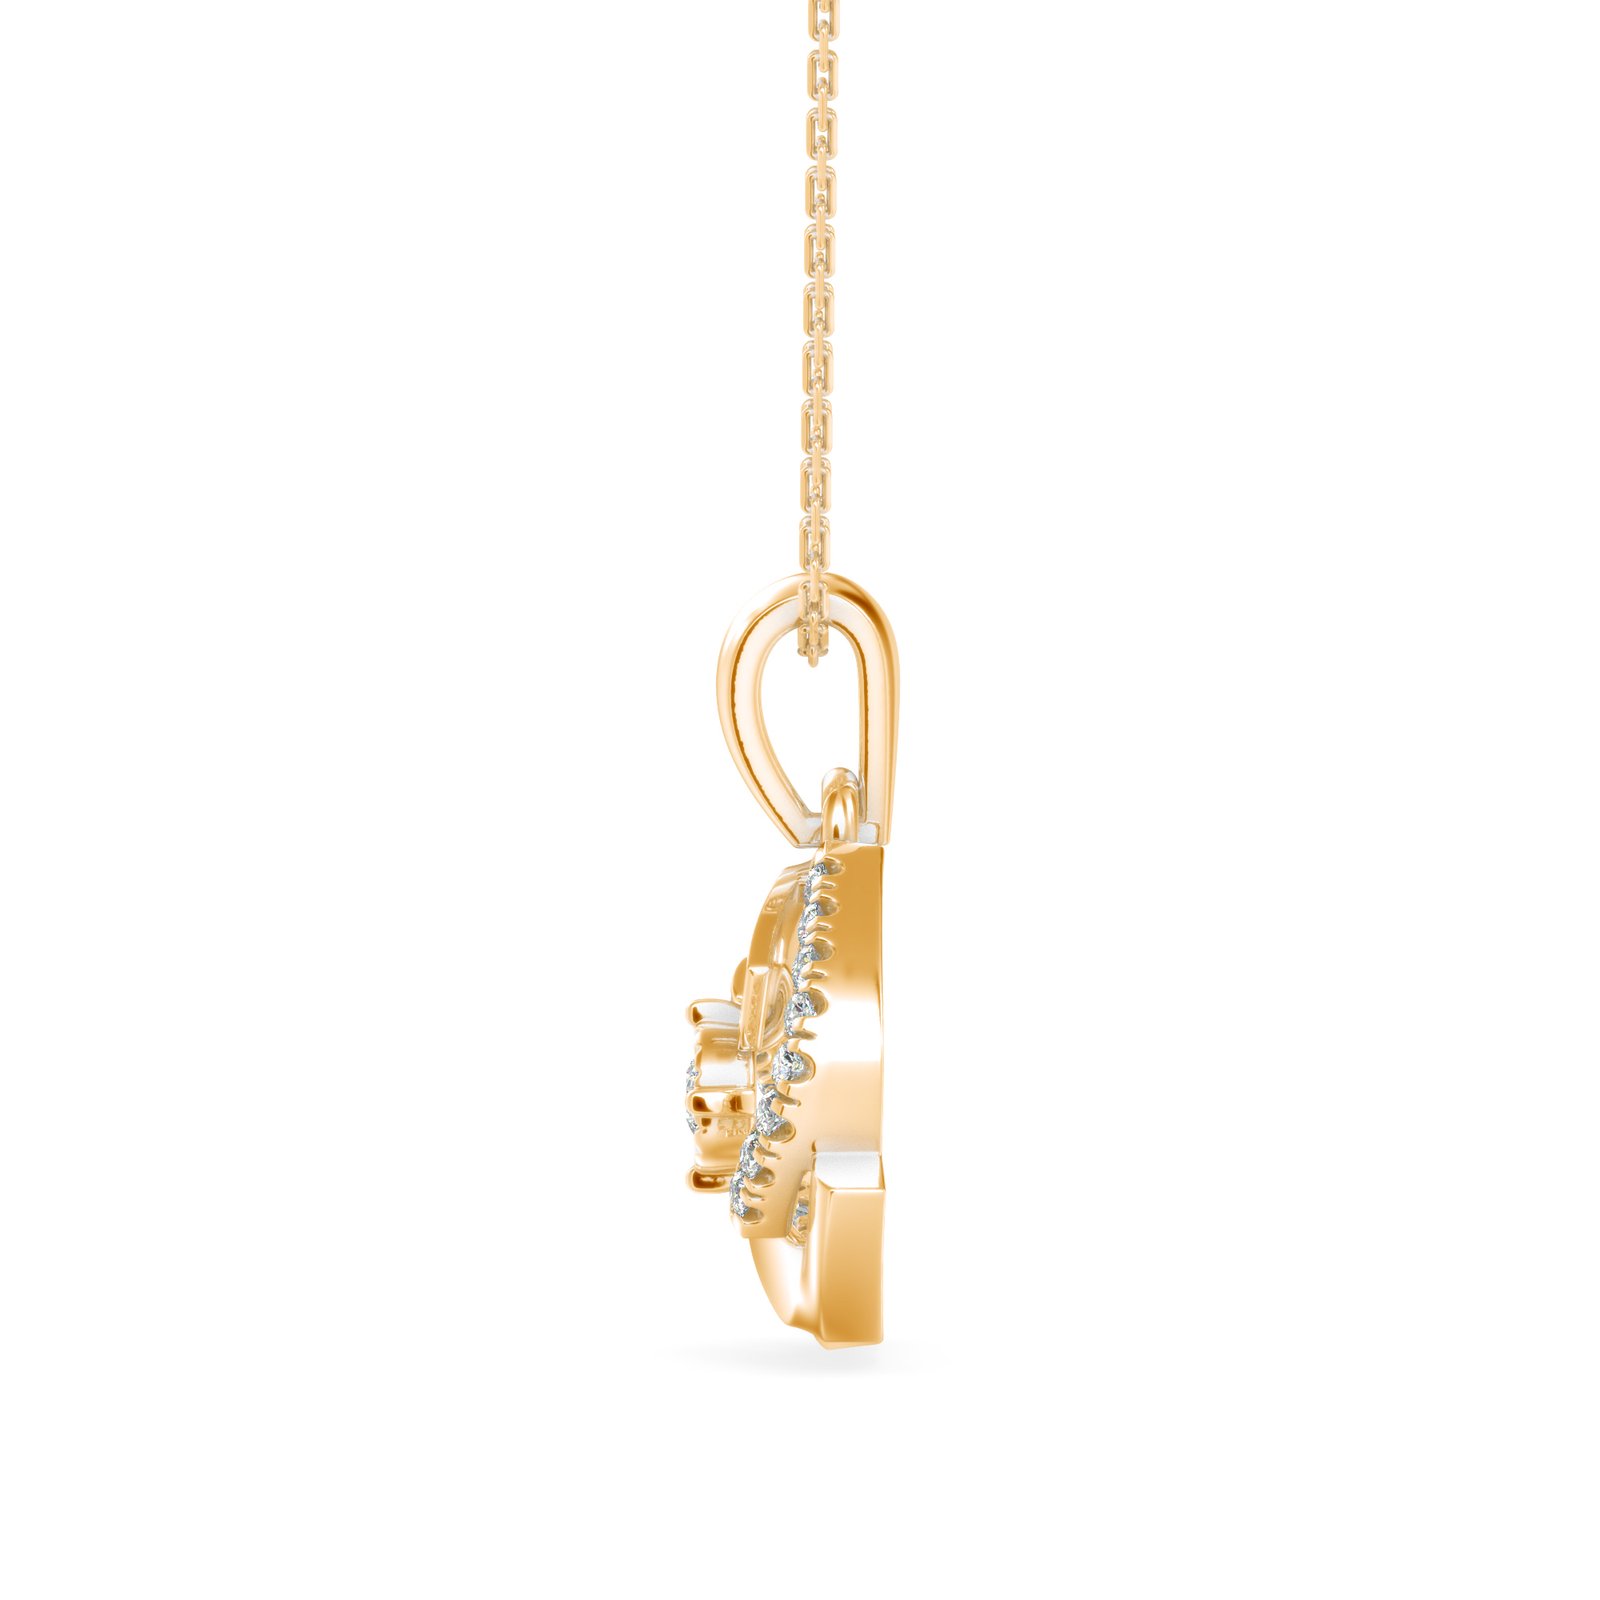 Spinning Curved Square Diamond Pendant In Pure Gold By Dhanji Jewels